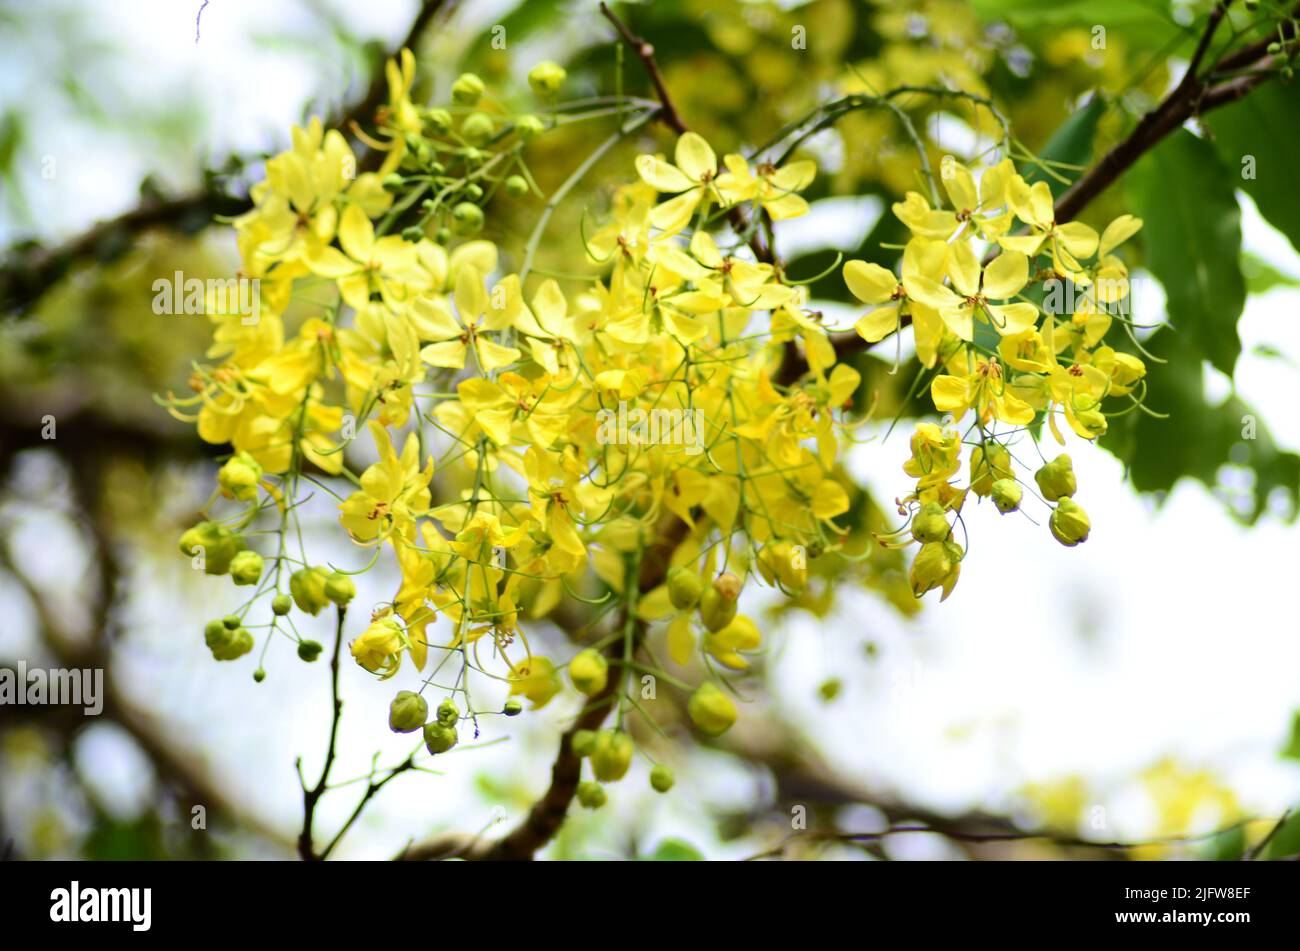 A branch of vibrant yellow cassia flowers Stock Photo